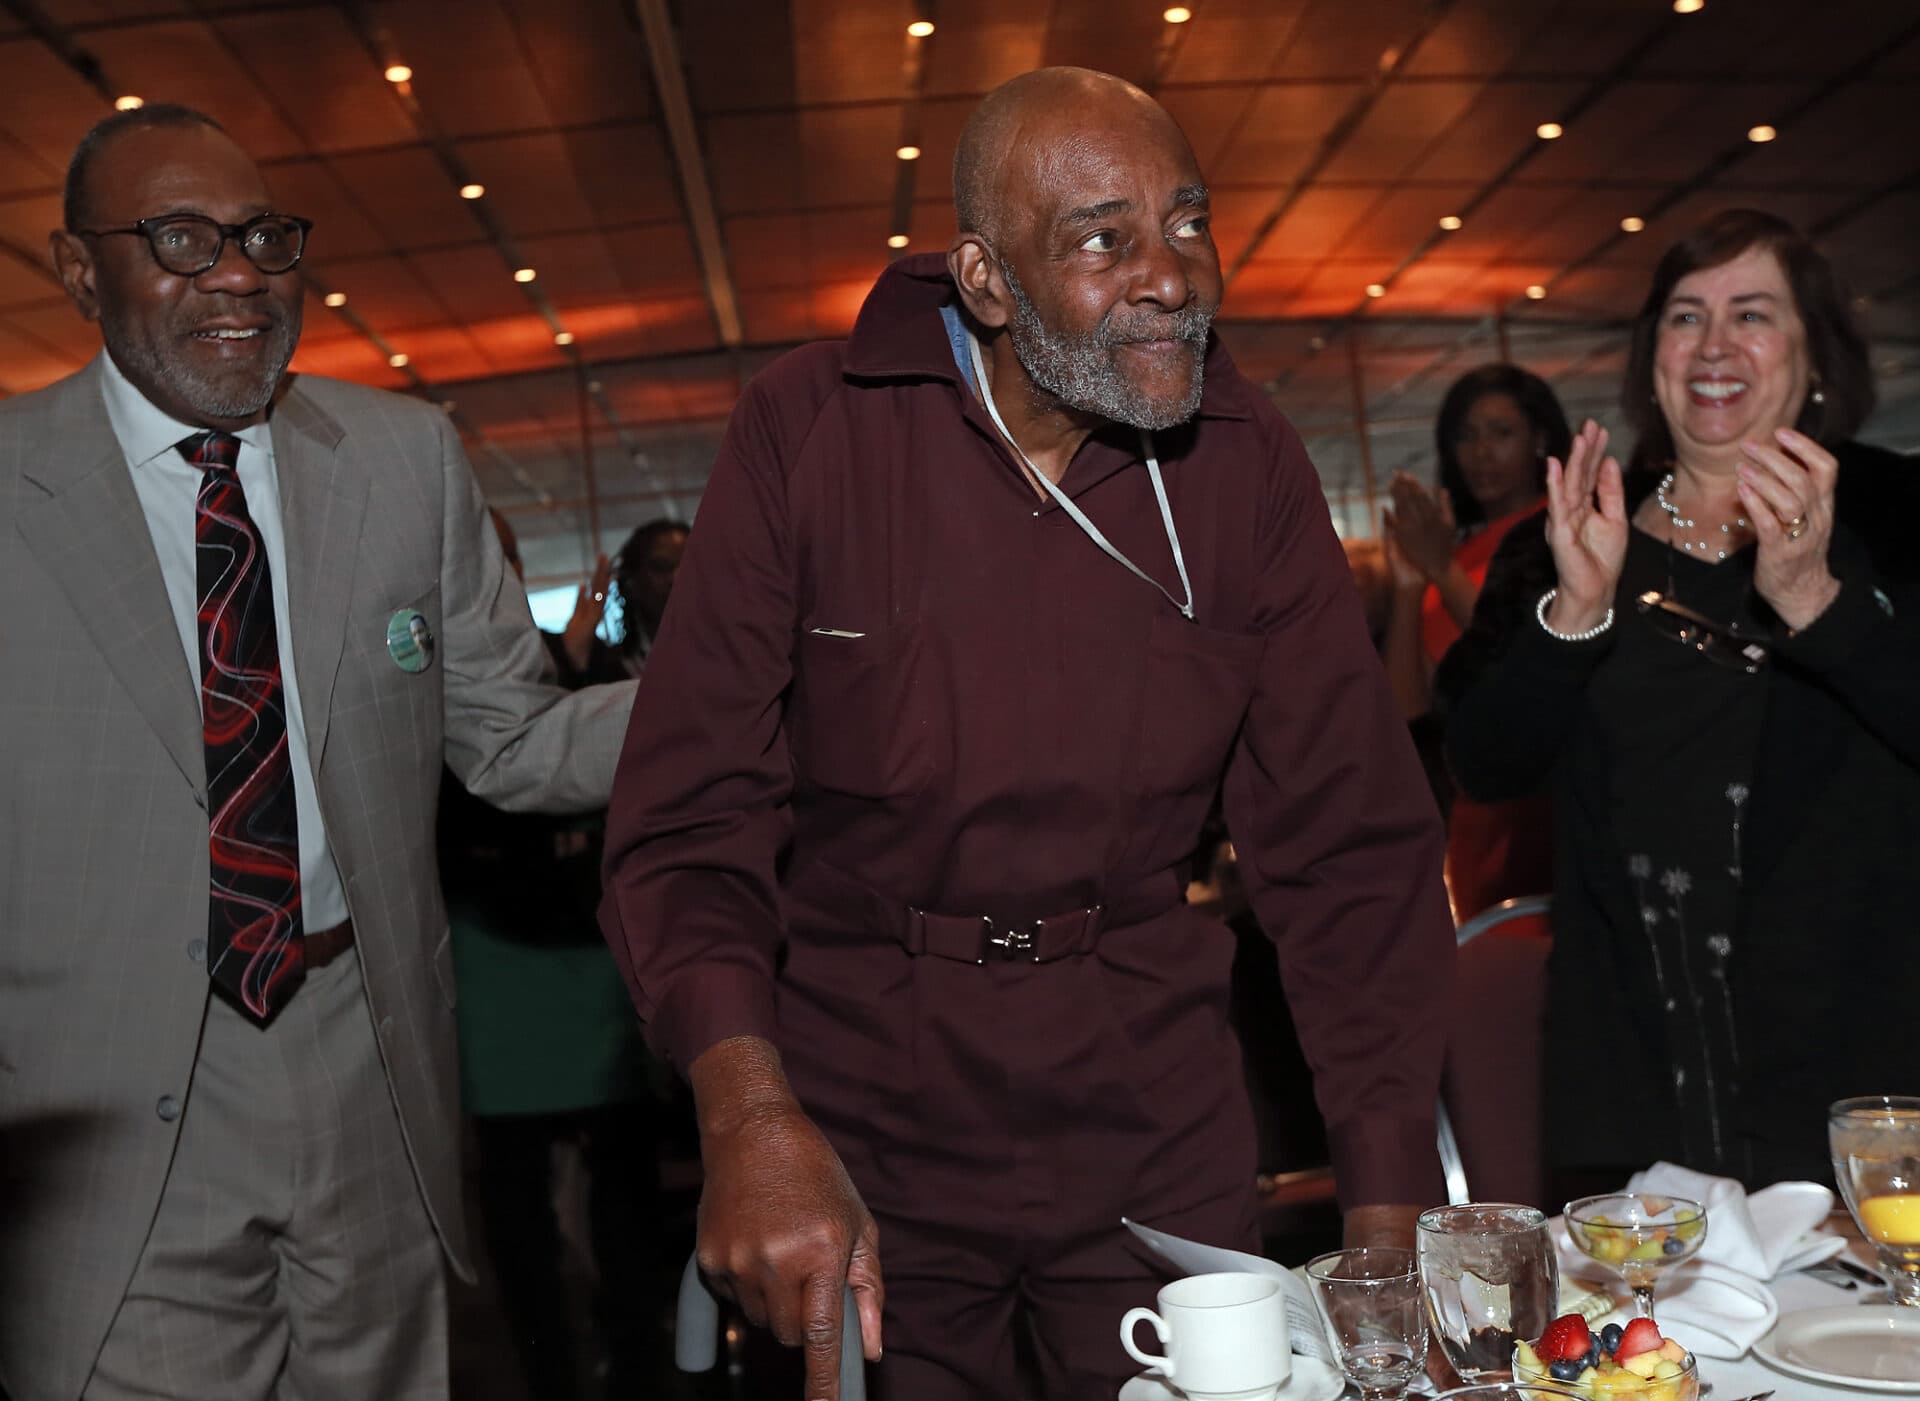 Mel King gets a standing ovation during the MLK Breakfast at the Boston Convention Center in 2017. (Matt Stone/MediaNews Group/Boston Herald via Getty Images)